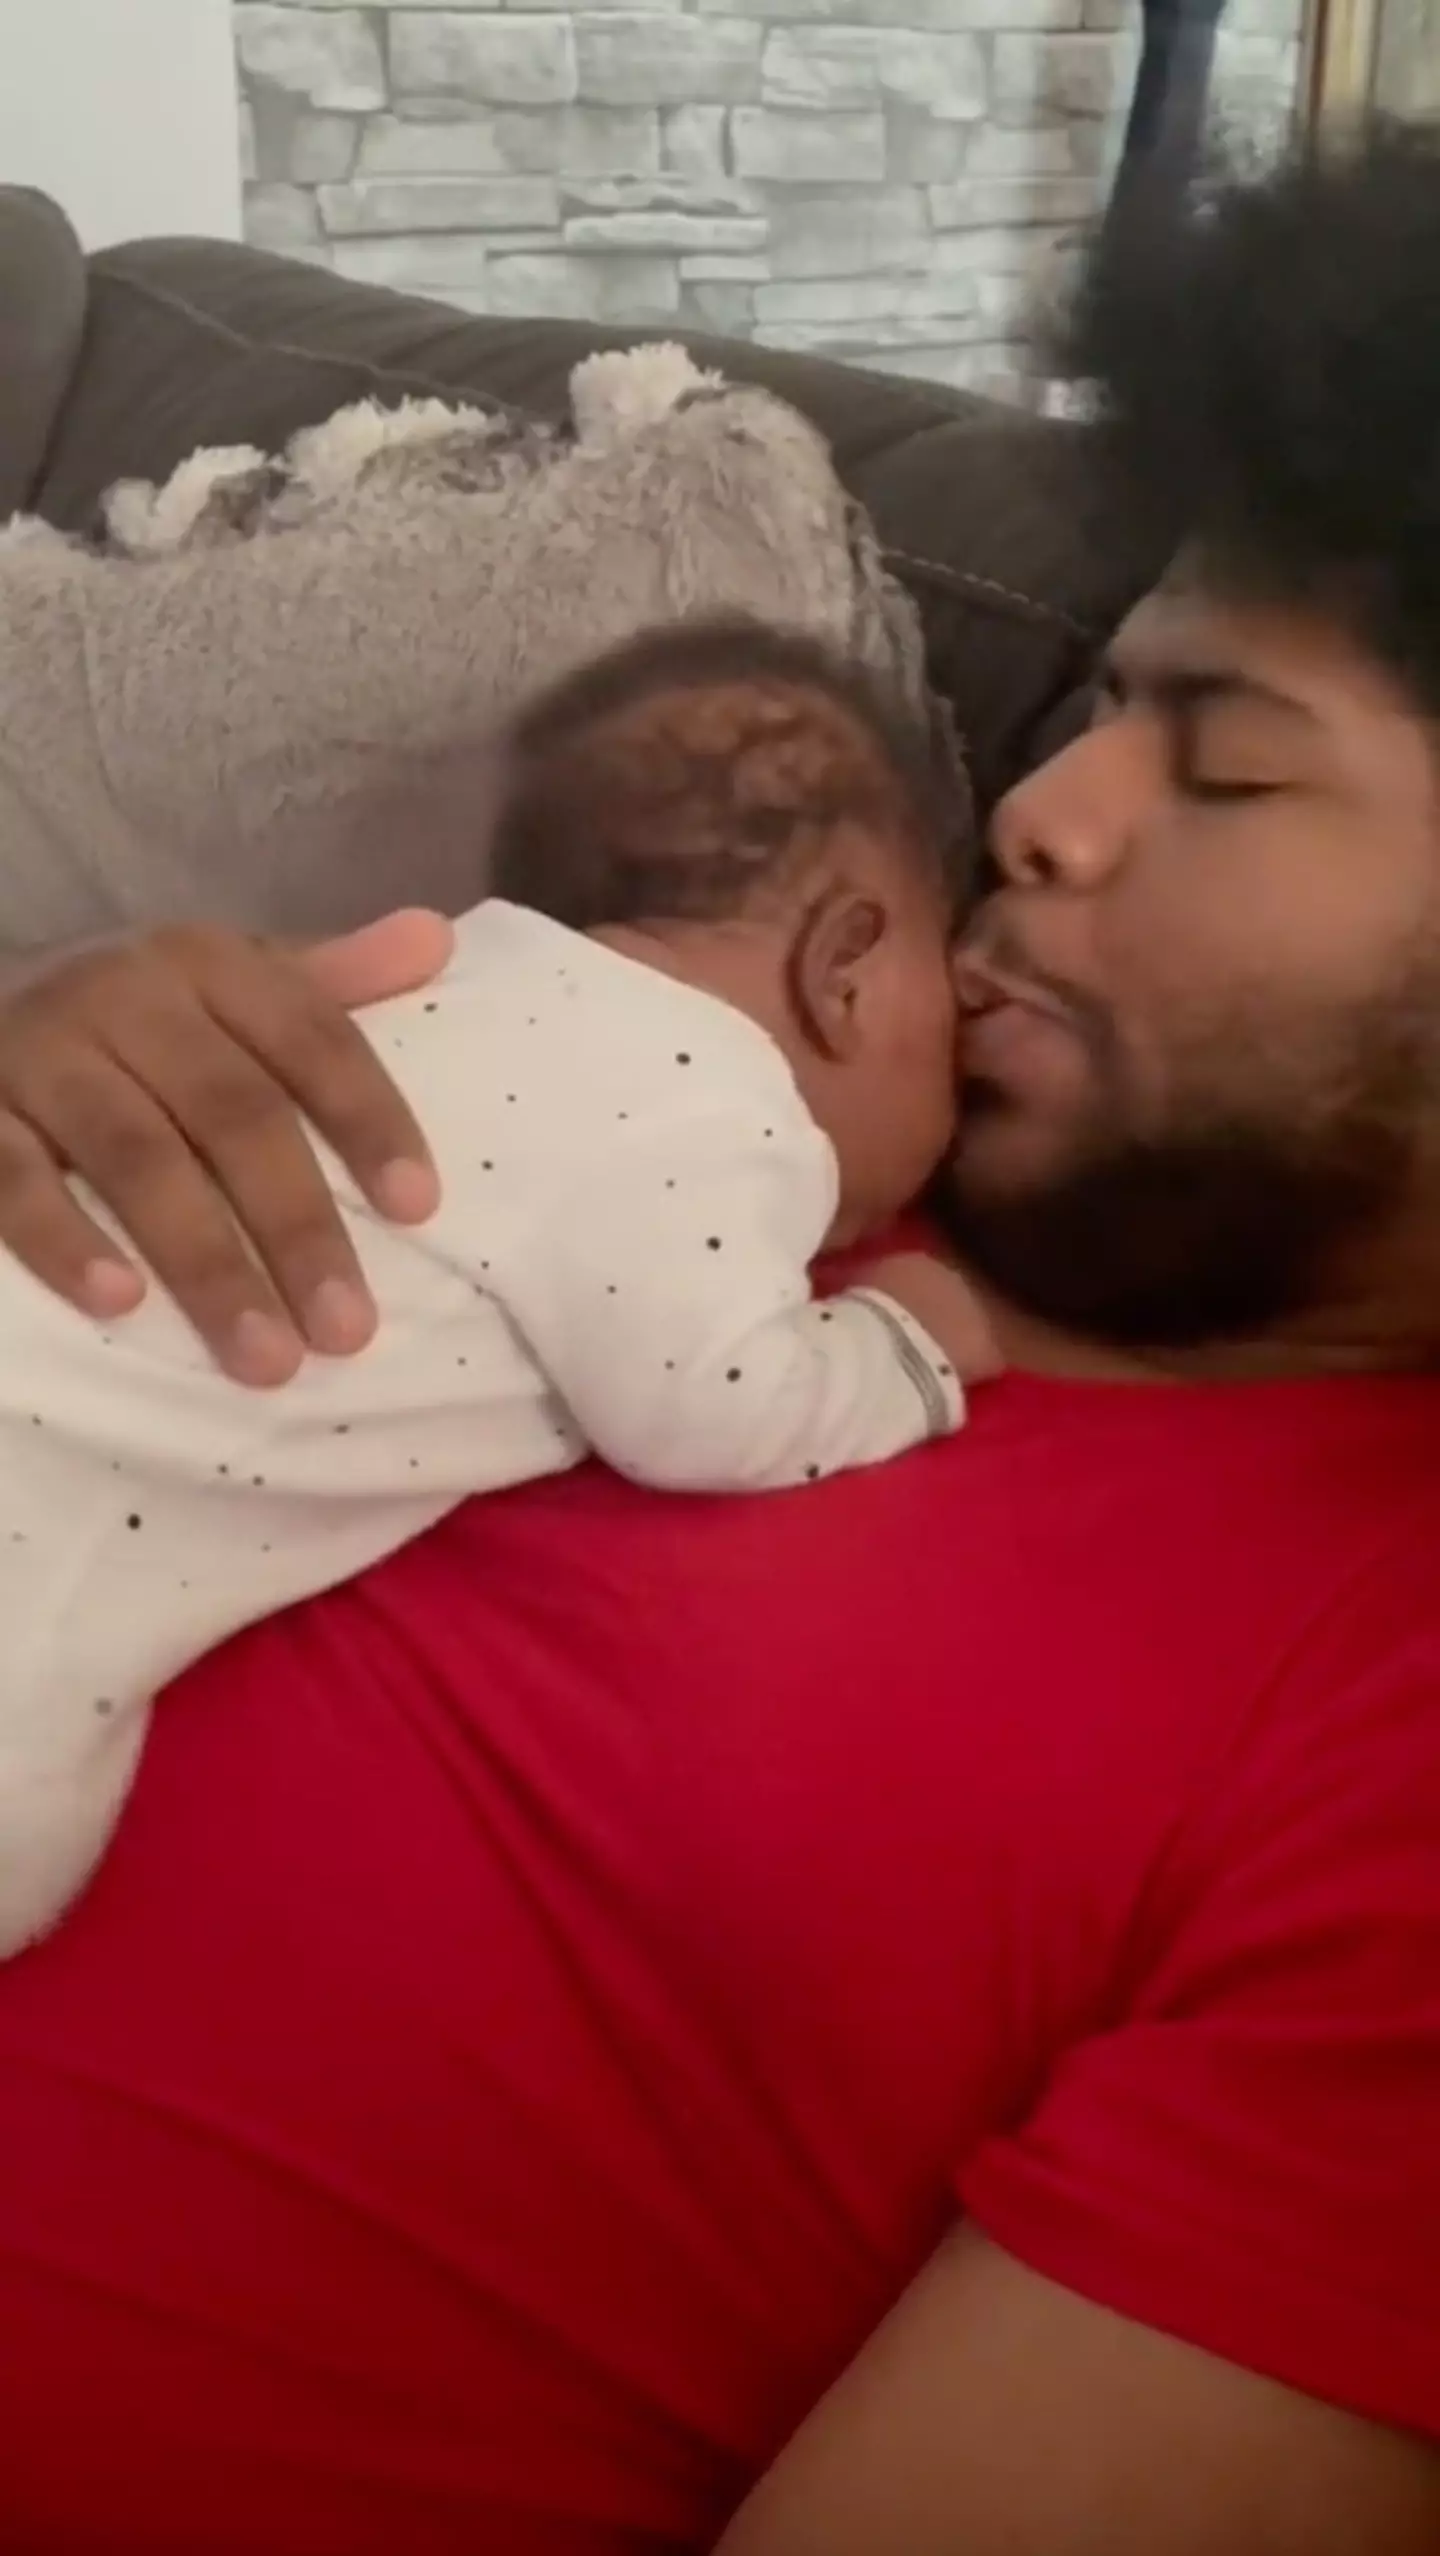 The dad kisses his newborn before she gives him a kiss back.